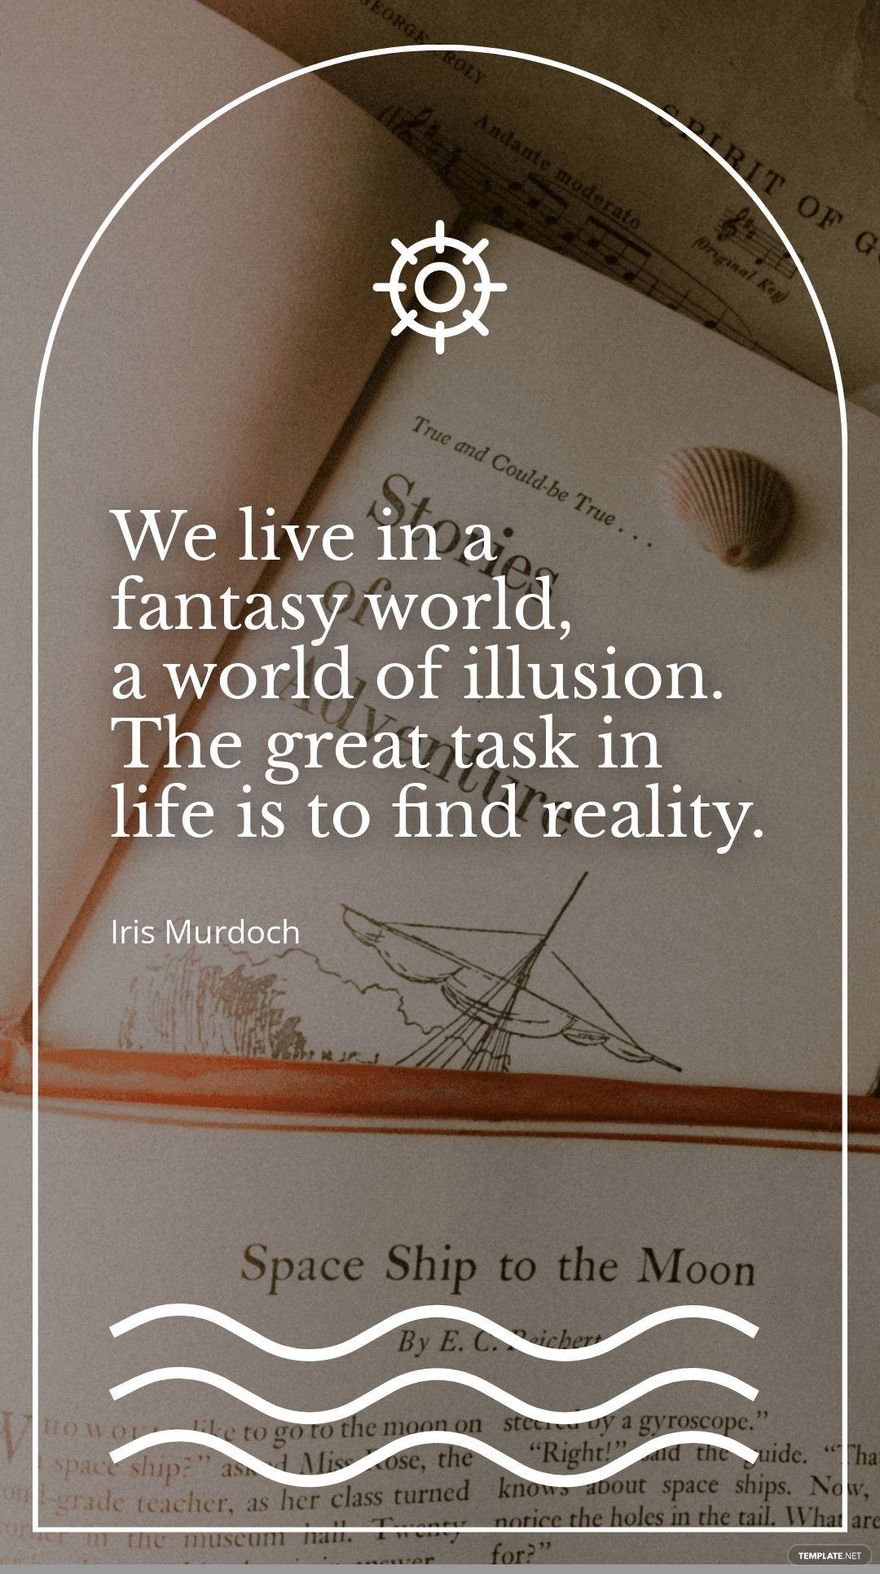 Iris Murdoch - We live in a fantasy world, a world of illusion. The great task in life is to find reality.